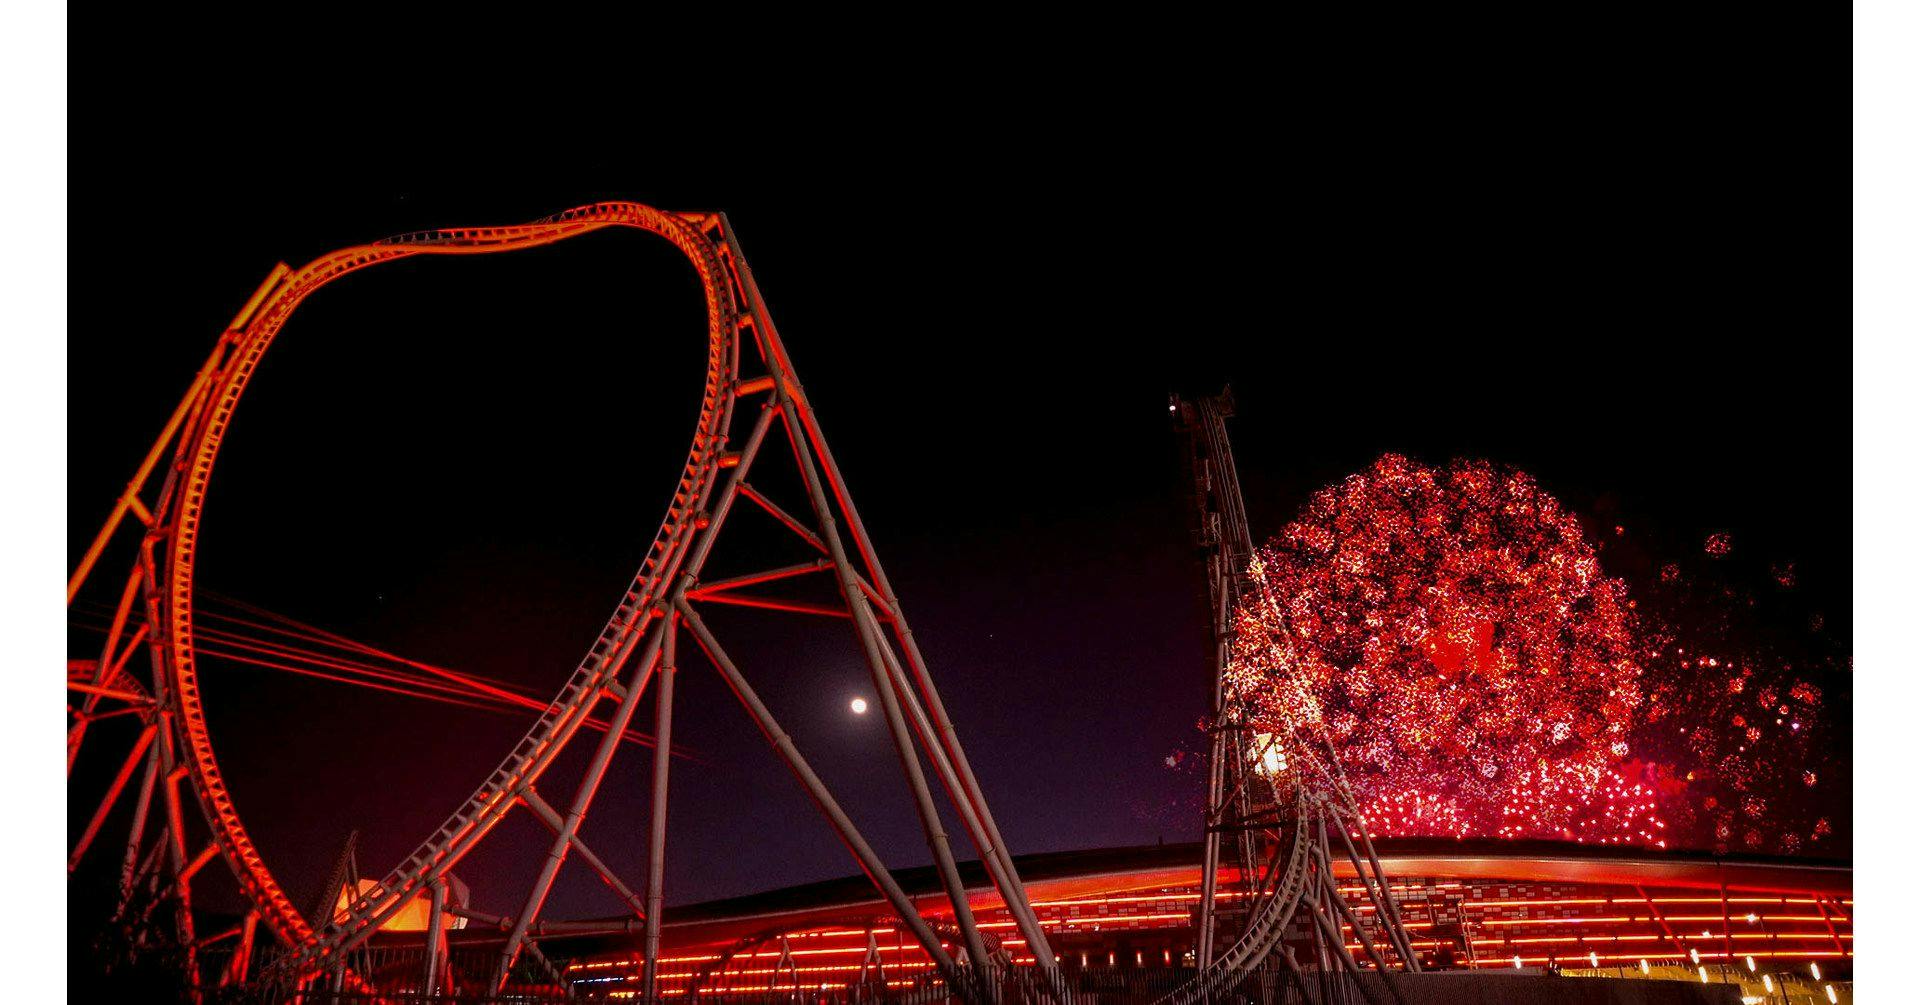 A roller coaster structure reflecting red light during nightime.